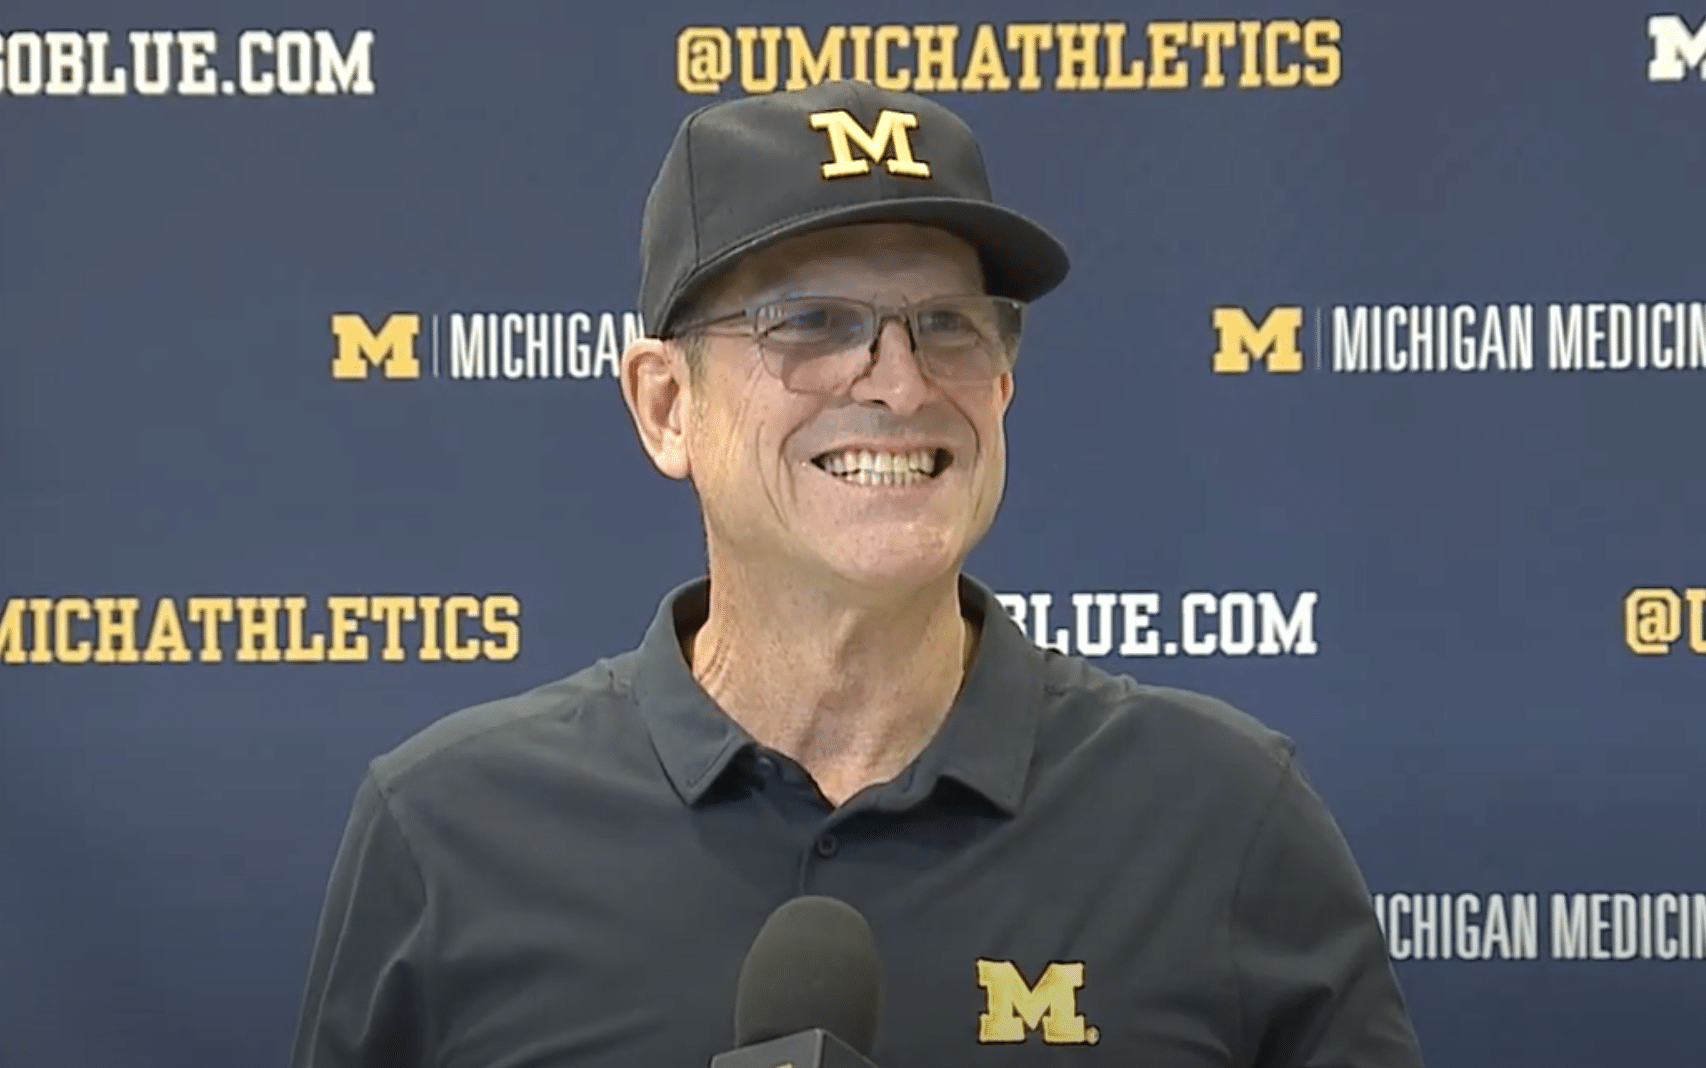 Jim Harbaugh explains why Michigan Football Jim Harbaugh compares Michigan locker room Jim Harbaugh praises Sherrone Moore Will Jim Harbaugh receive his bonuses for 2023 Los Angeles Chargers interested in hiring Jim Harbaugh Jim Harbaugh Talks About J.J. McCarthy's Growth at Michigan Jim Harbaugh Has Perfect Answer to Question About His Future Will He Stay or Go? New Developments in Jim Harbaugh's Career with Michigan Revealed Jim Harbaugh interviews with Atlanta Falcons Jim Harbaugh contract details with Los Angeles Chargers